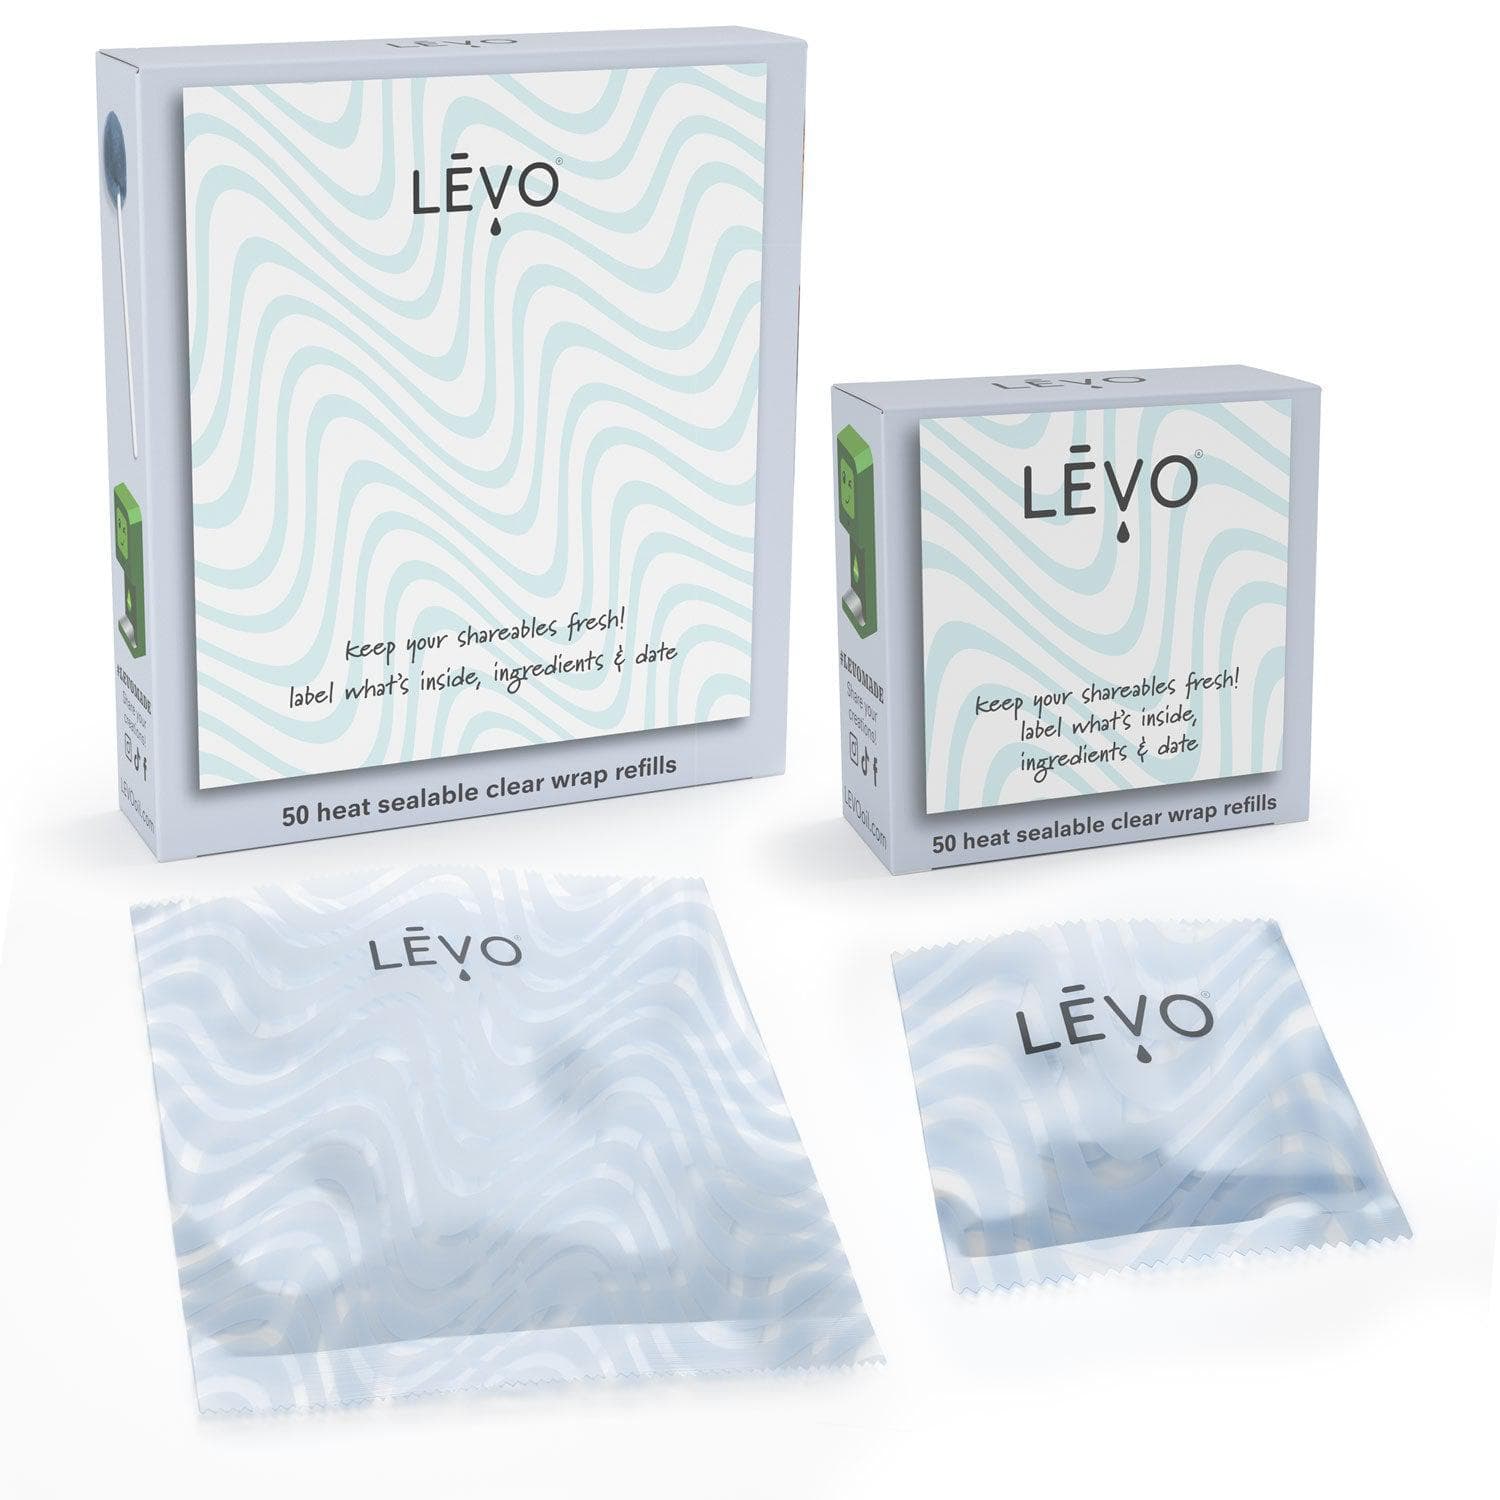 LEVO 50 heat sealable clear wrap refills to keep your shareables fresh